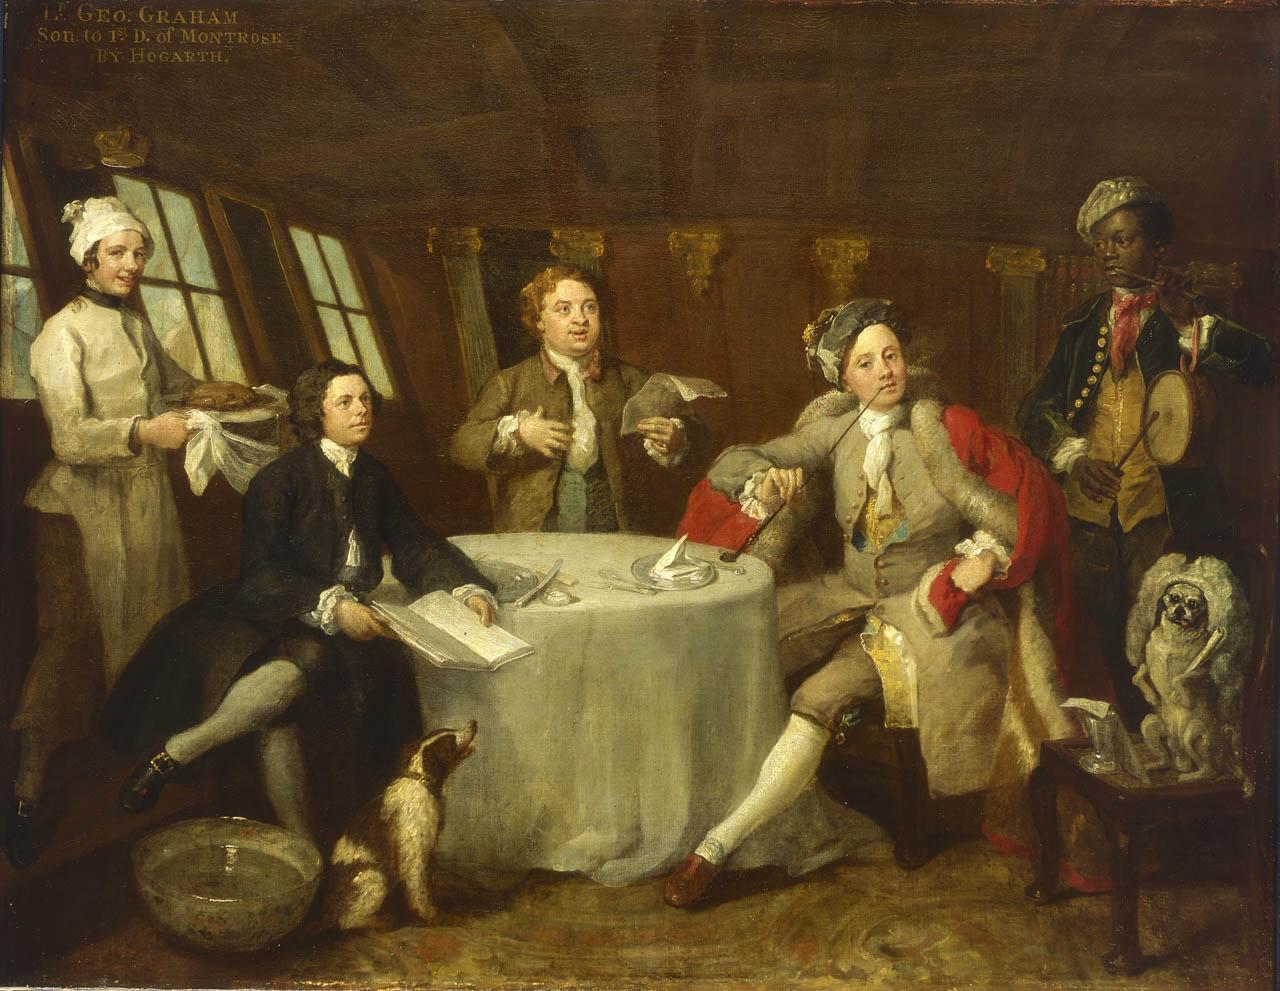 An image showing 'Captain Lord George Graham, 1715-47, in his Cabin by William Hogarth'